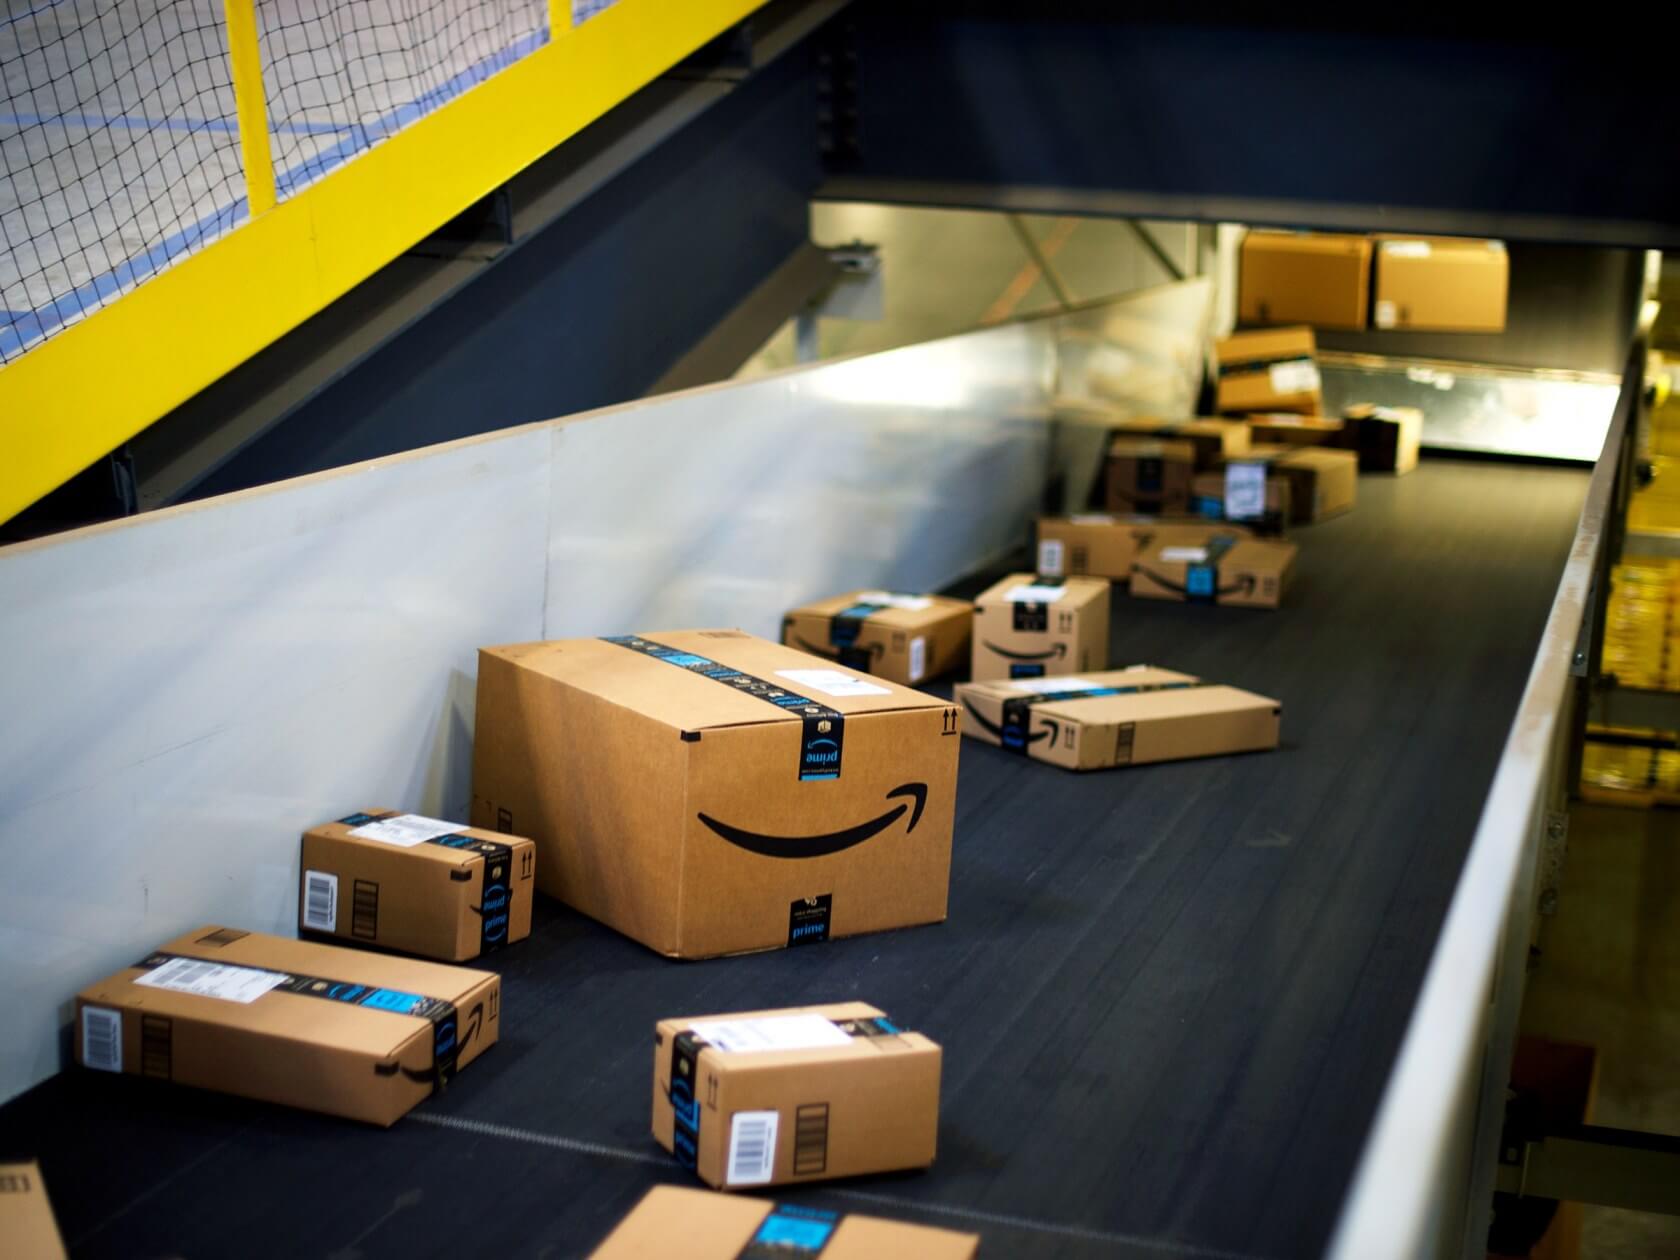 Amazon is reportedly planning to construct a new warehouse for dangerous products